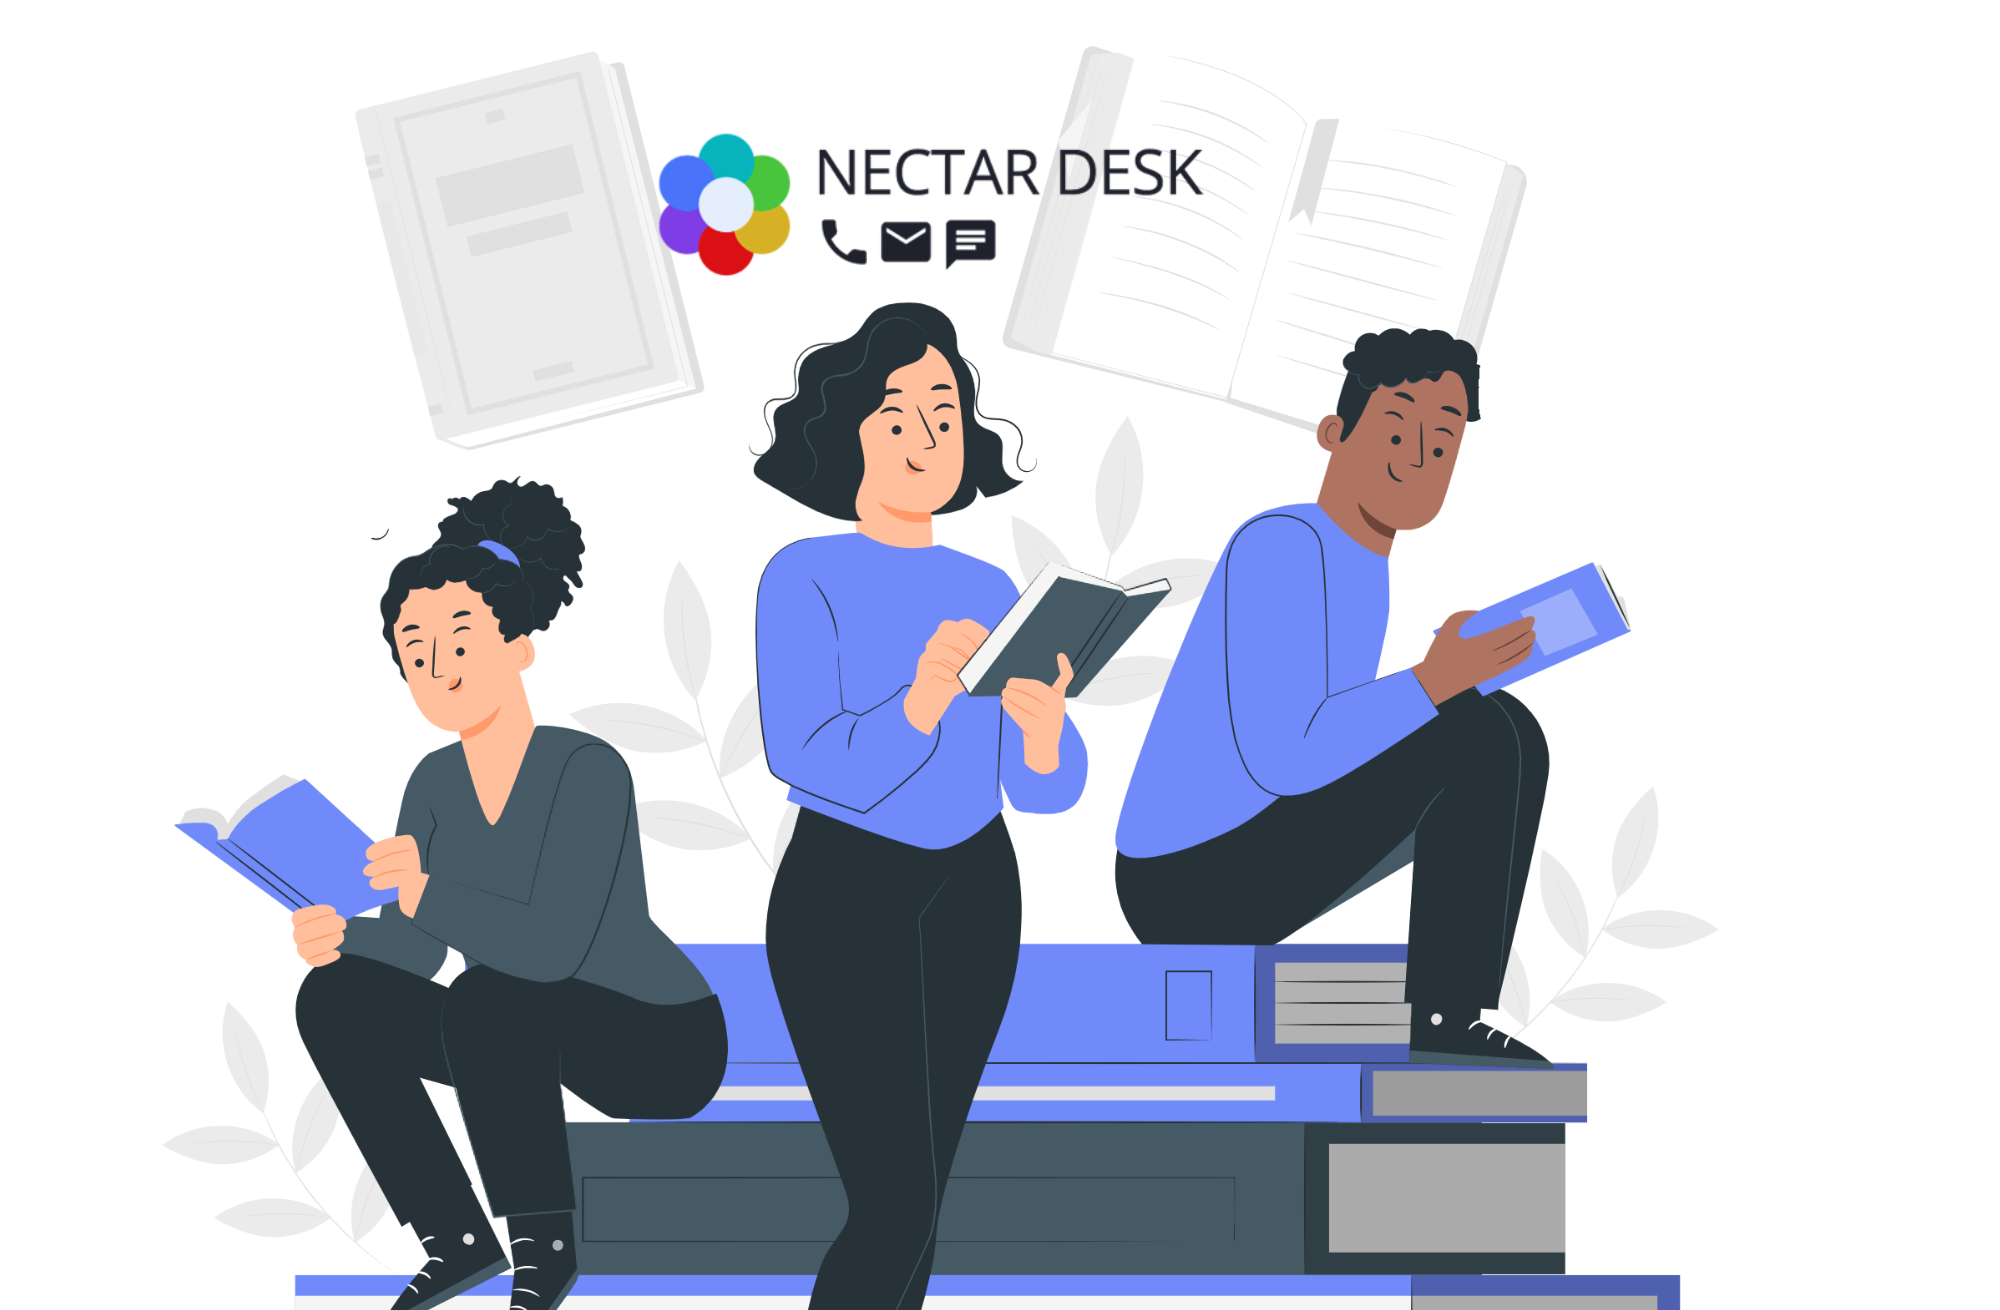 How To Start A Small Call Center Just in a Few Steps with Nectar Desk?